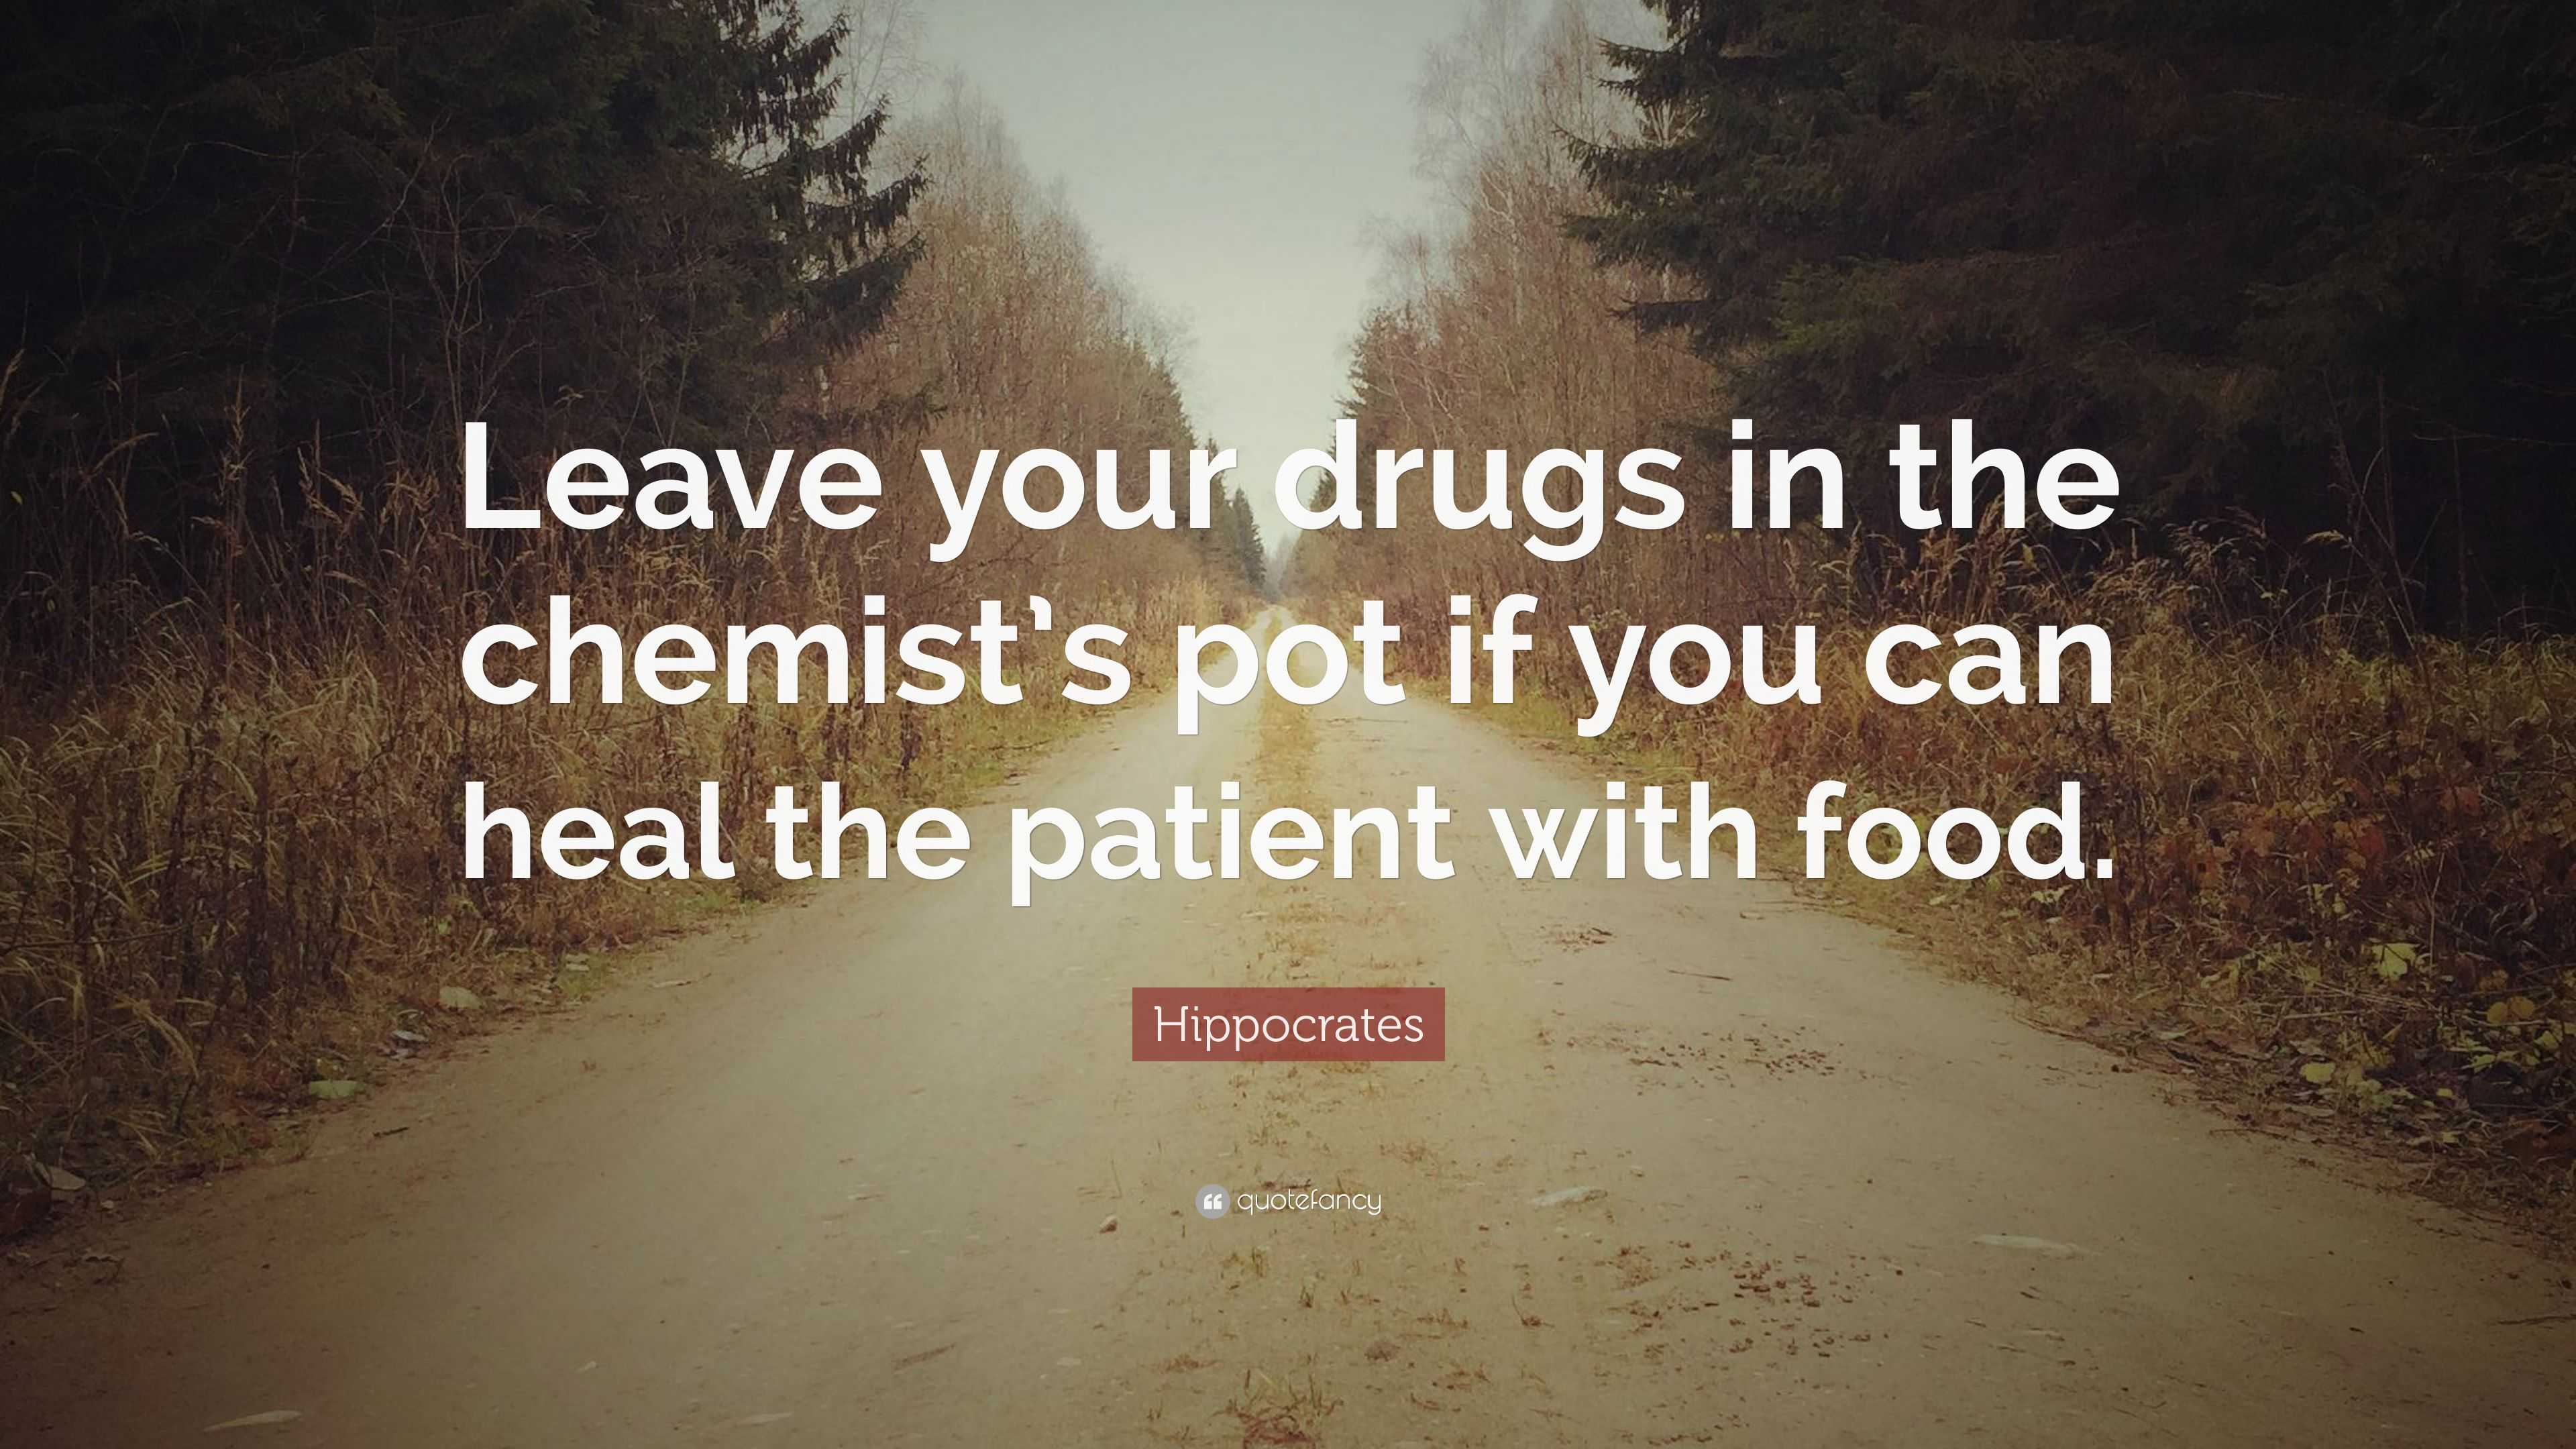 Hippocrates Quote: “Leave your drugs in the chemist’s pot if you can